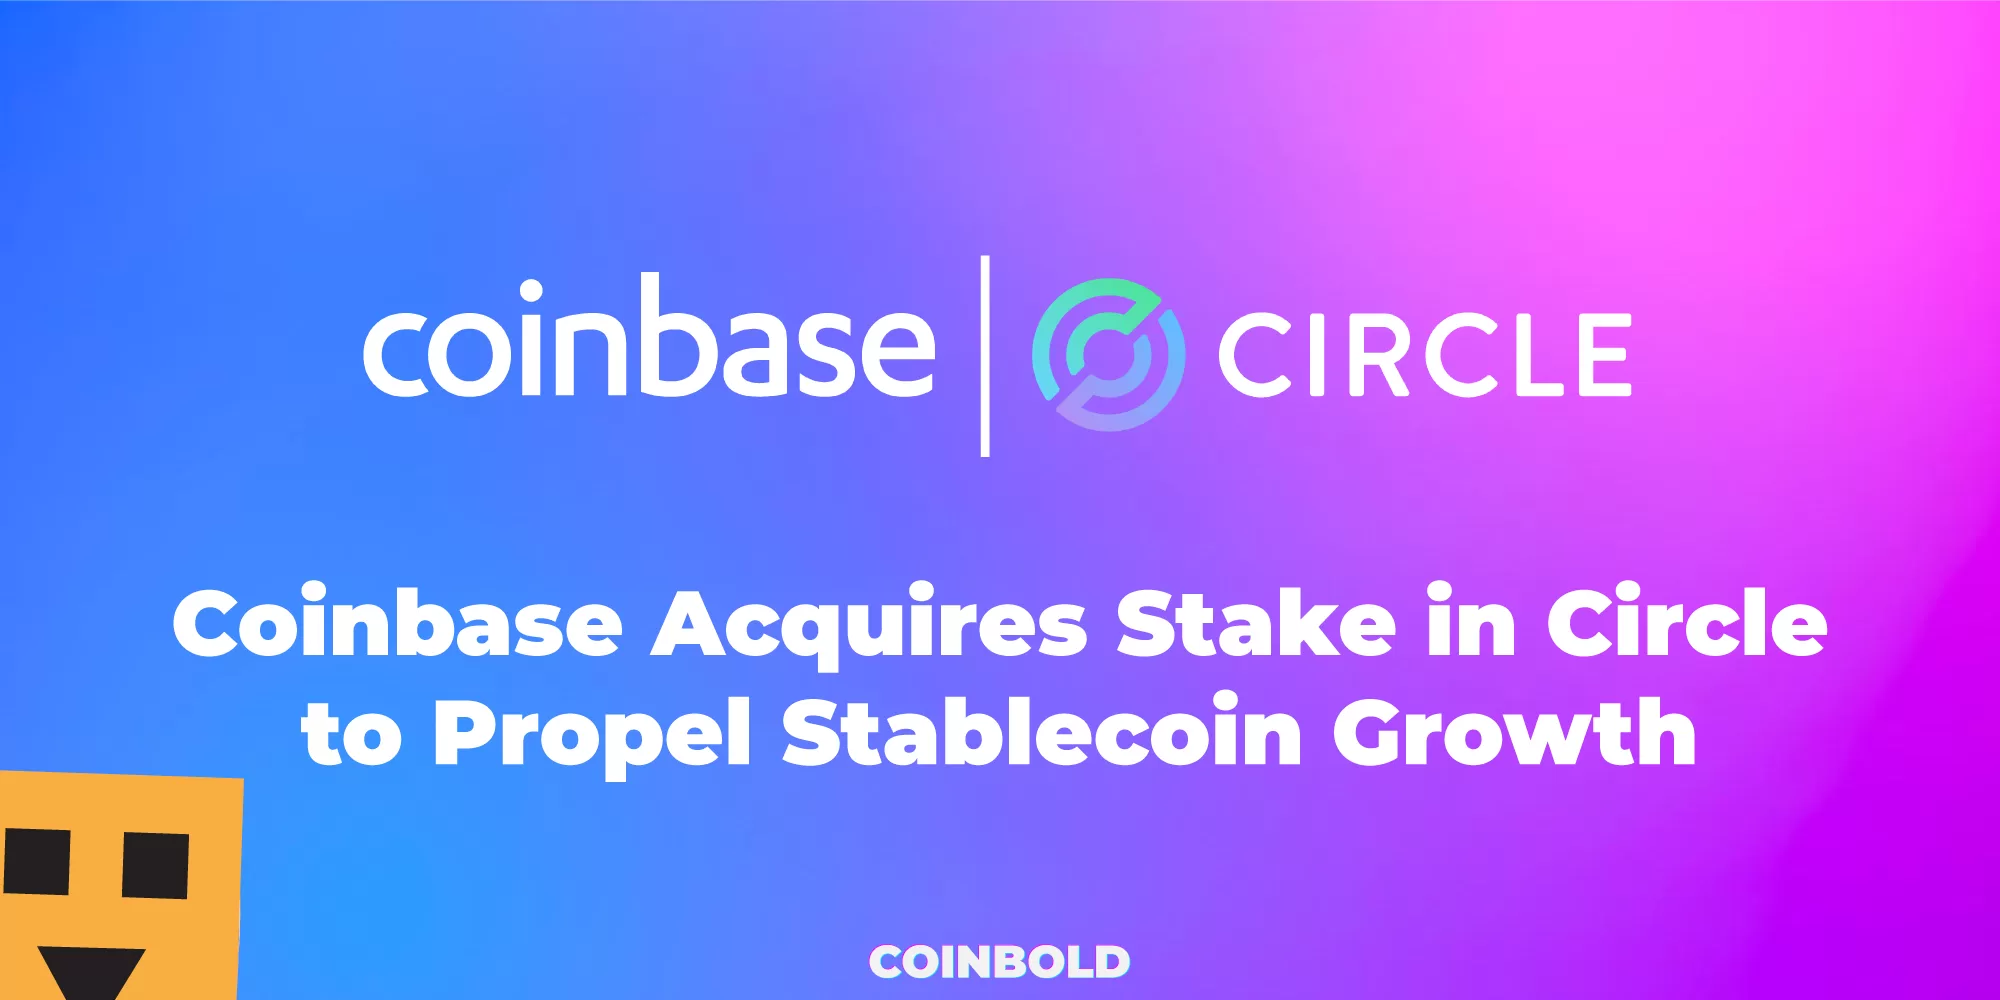 Coinbase Acquires Stake in Circle to Propel Stablecoin Growth